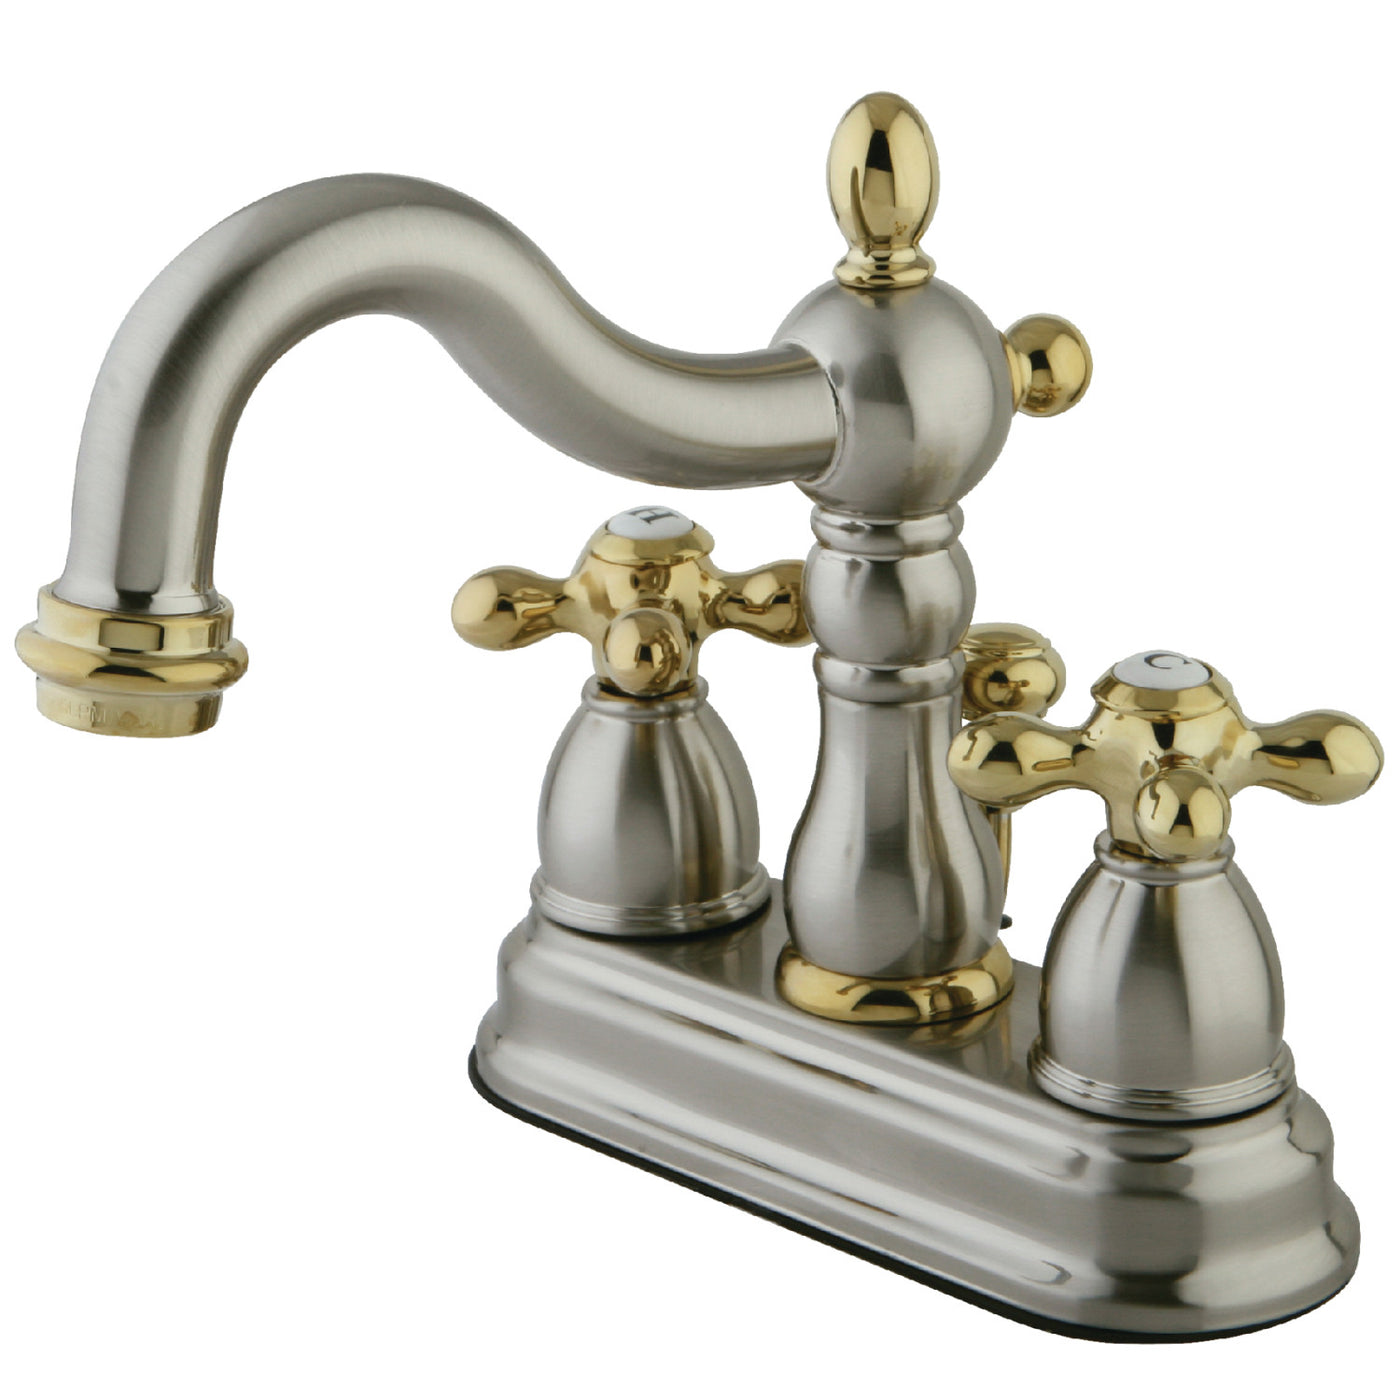 Elements of Design EB1609AX 4-Inch Centerset Bathroom Faucet with Plastic Pop-Up, Brushed Nickel/Polished Brass